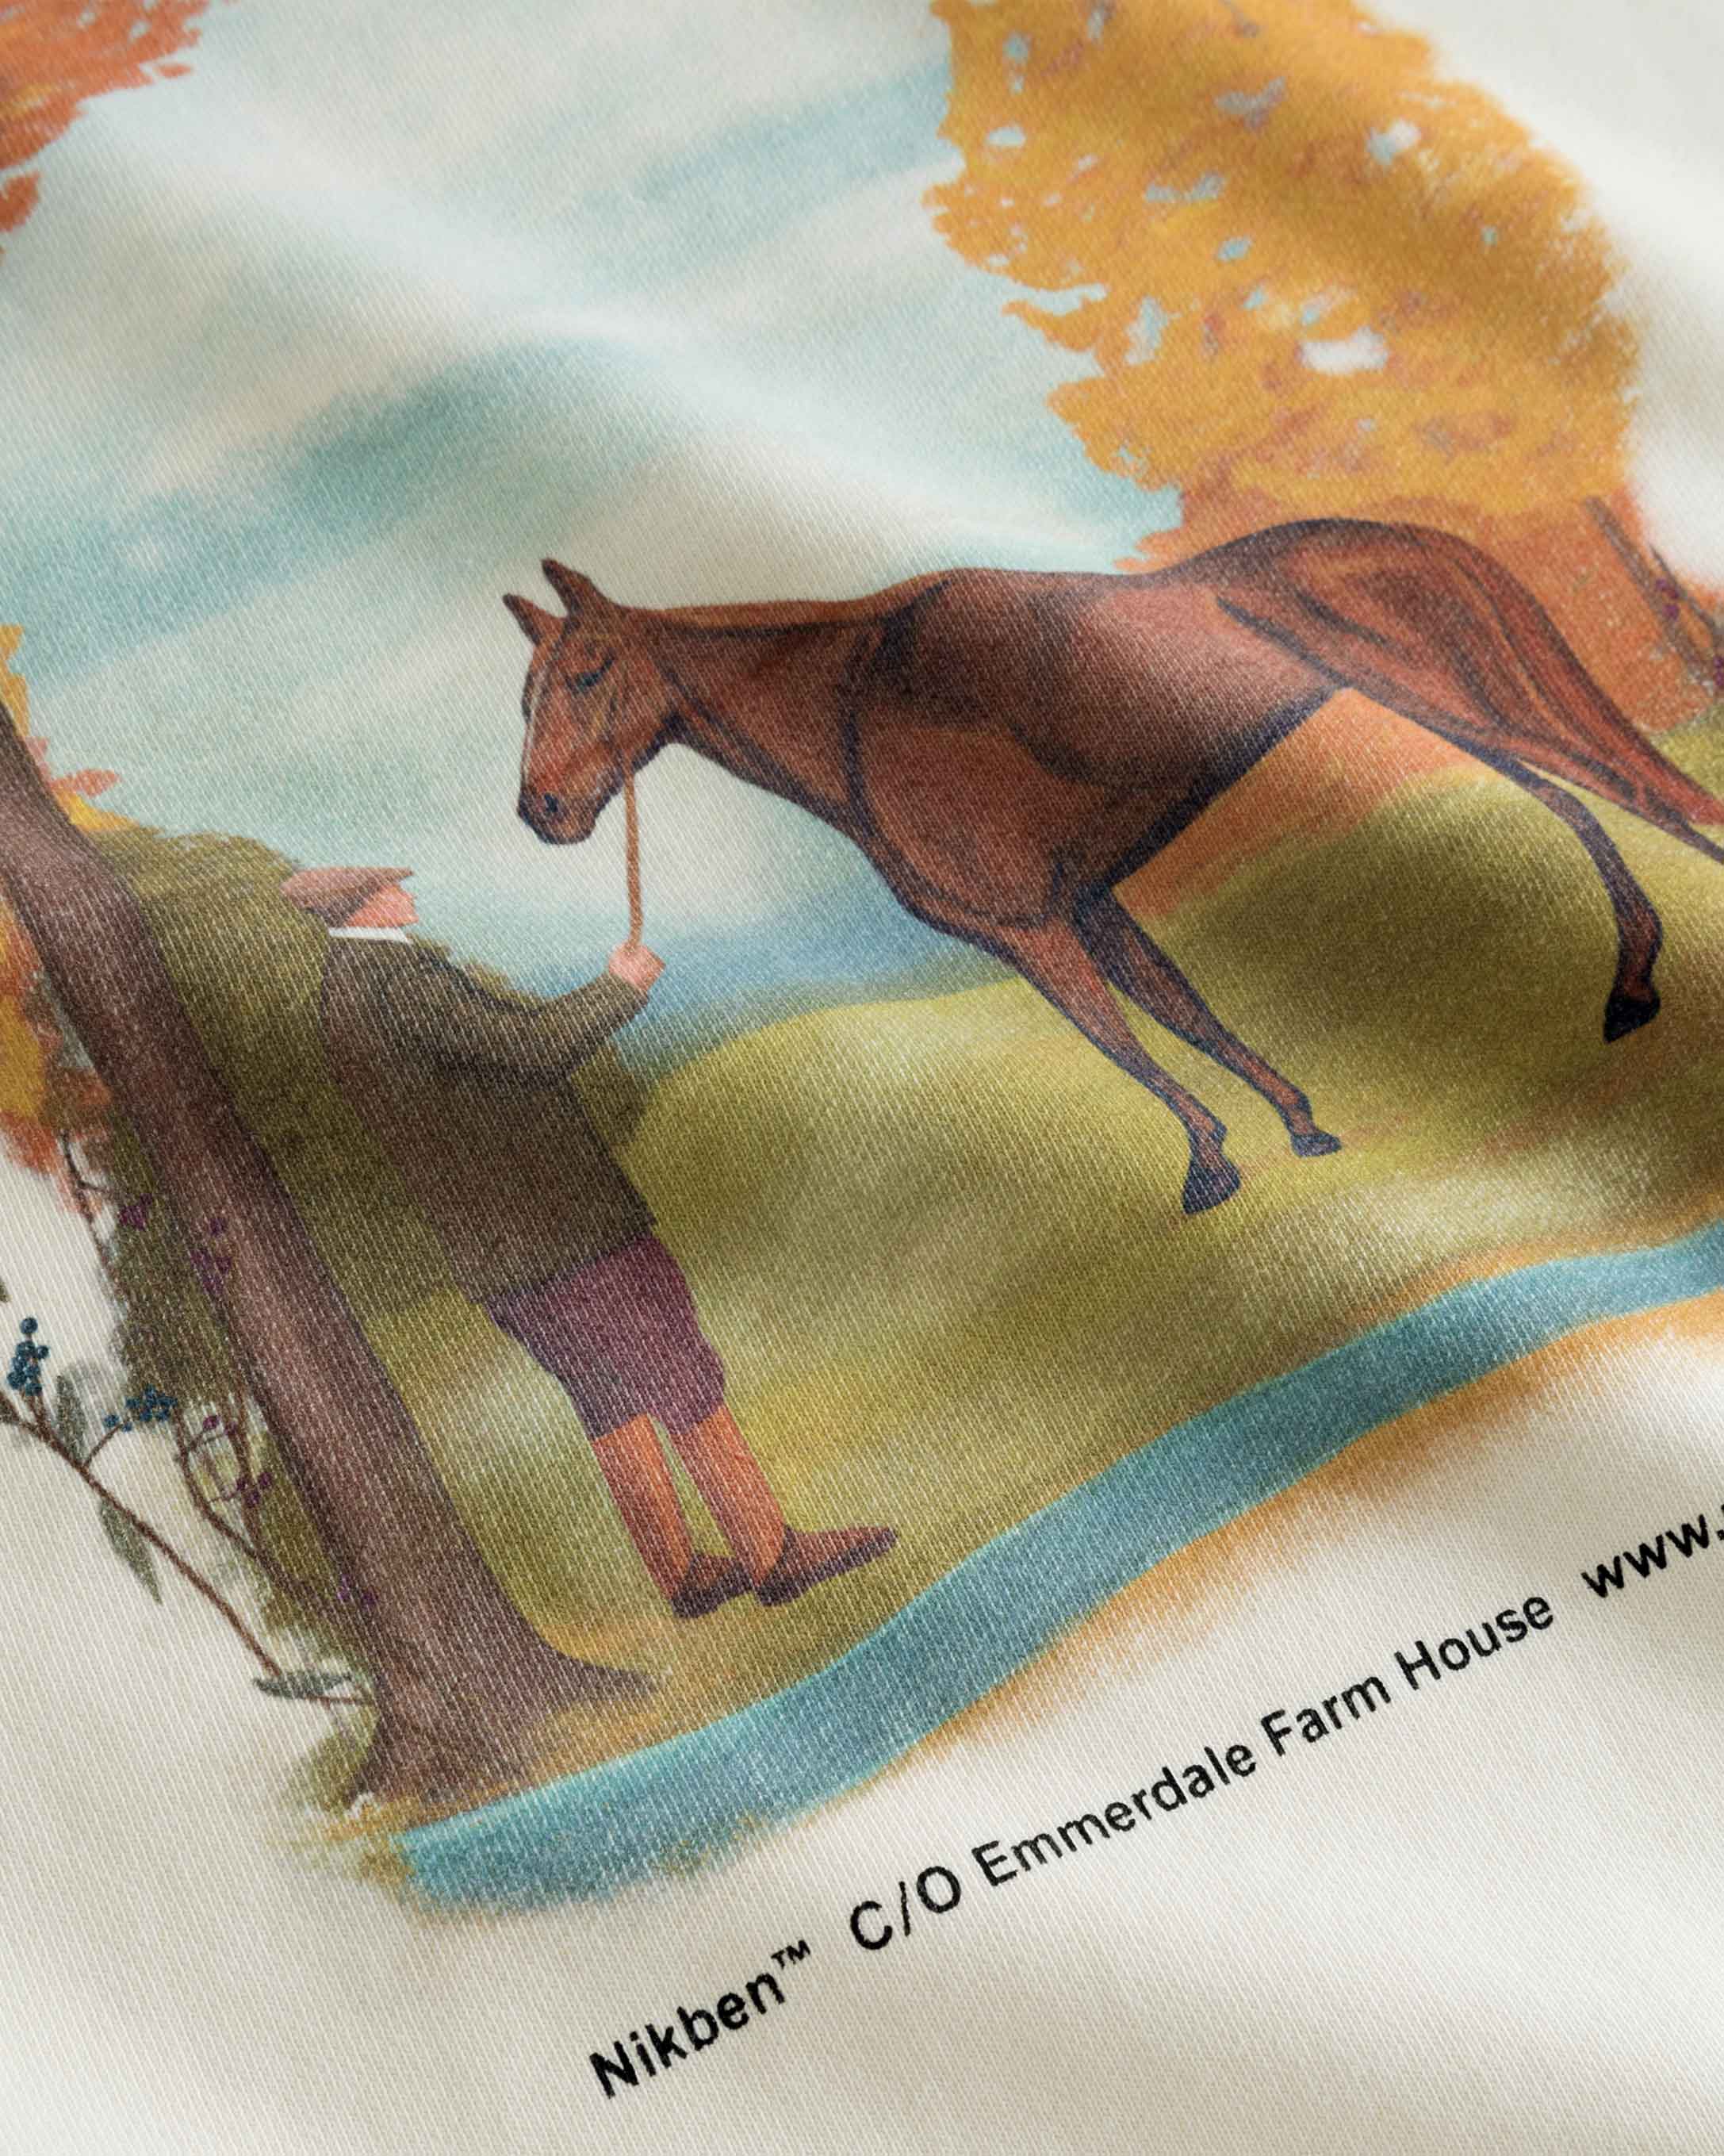 Close up of a man and horse print on a cream colored sweatshirt.